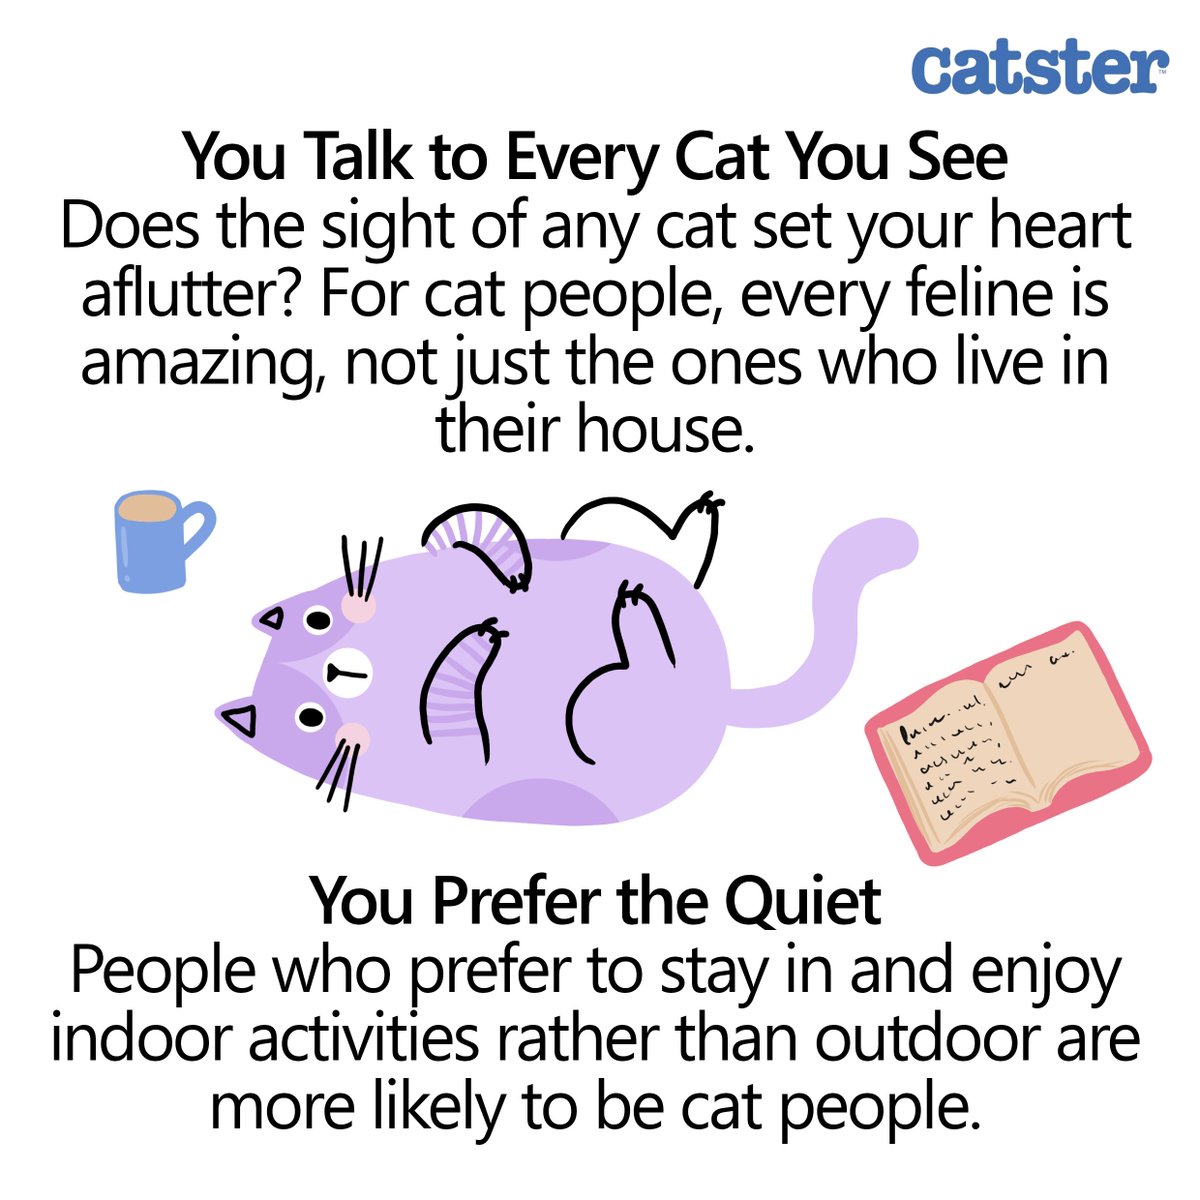 Let's look at some fun signs that show you're a cat person! 🐈💙 Part 2 #catster #catperson #catparents #catlove #catfun #catsigns